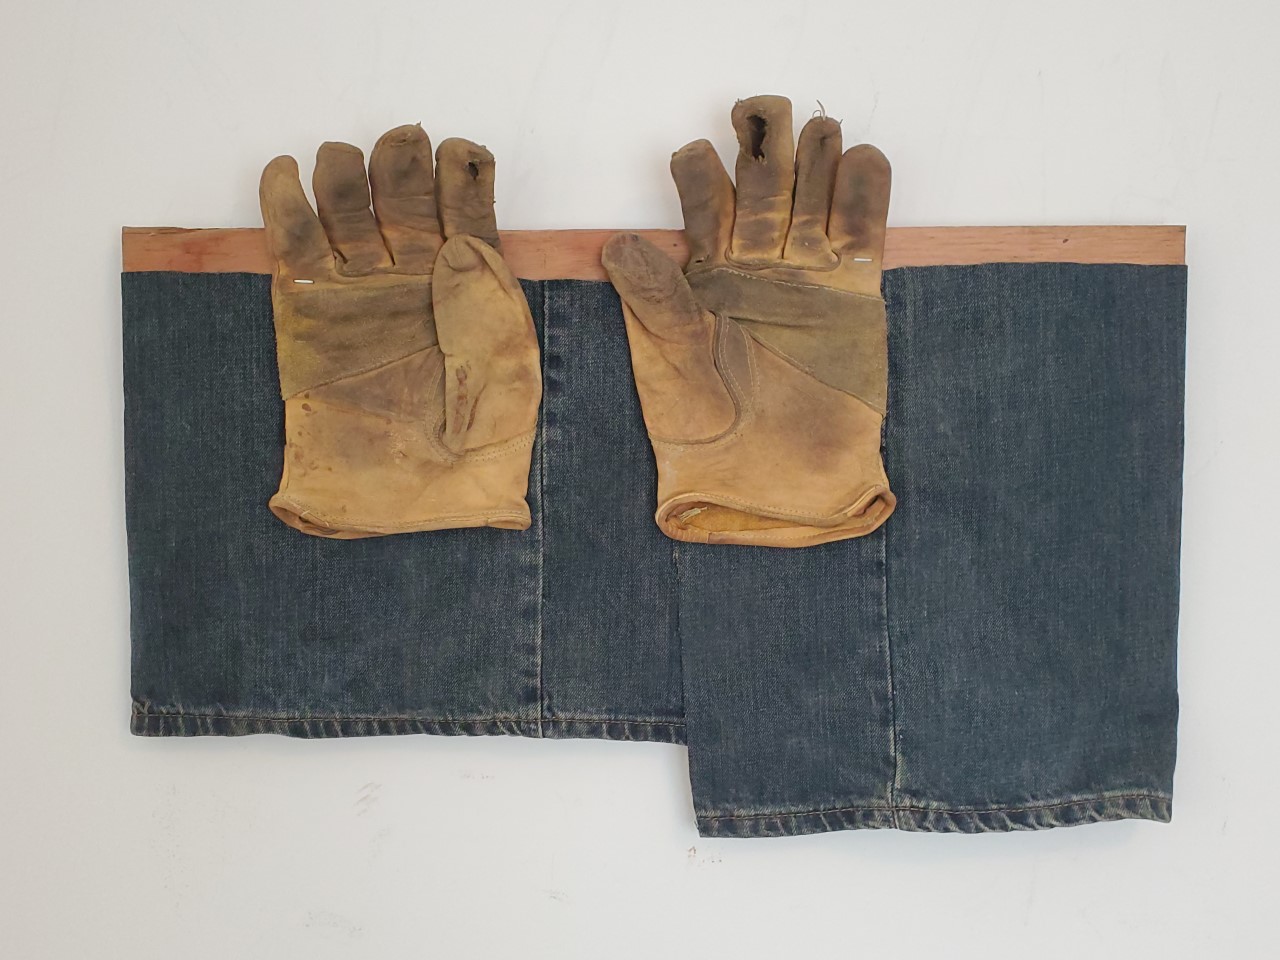 Photograph of two pieces of jean fabric hanging from a wooden bar. There are two yellow work gloves stapled to the bar.